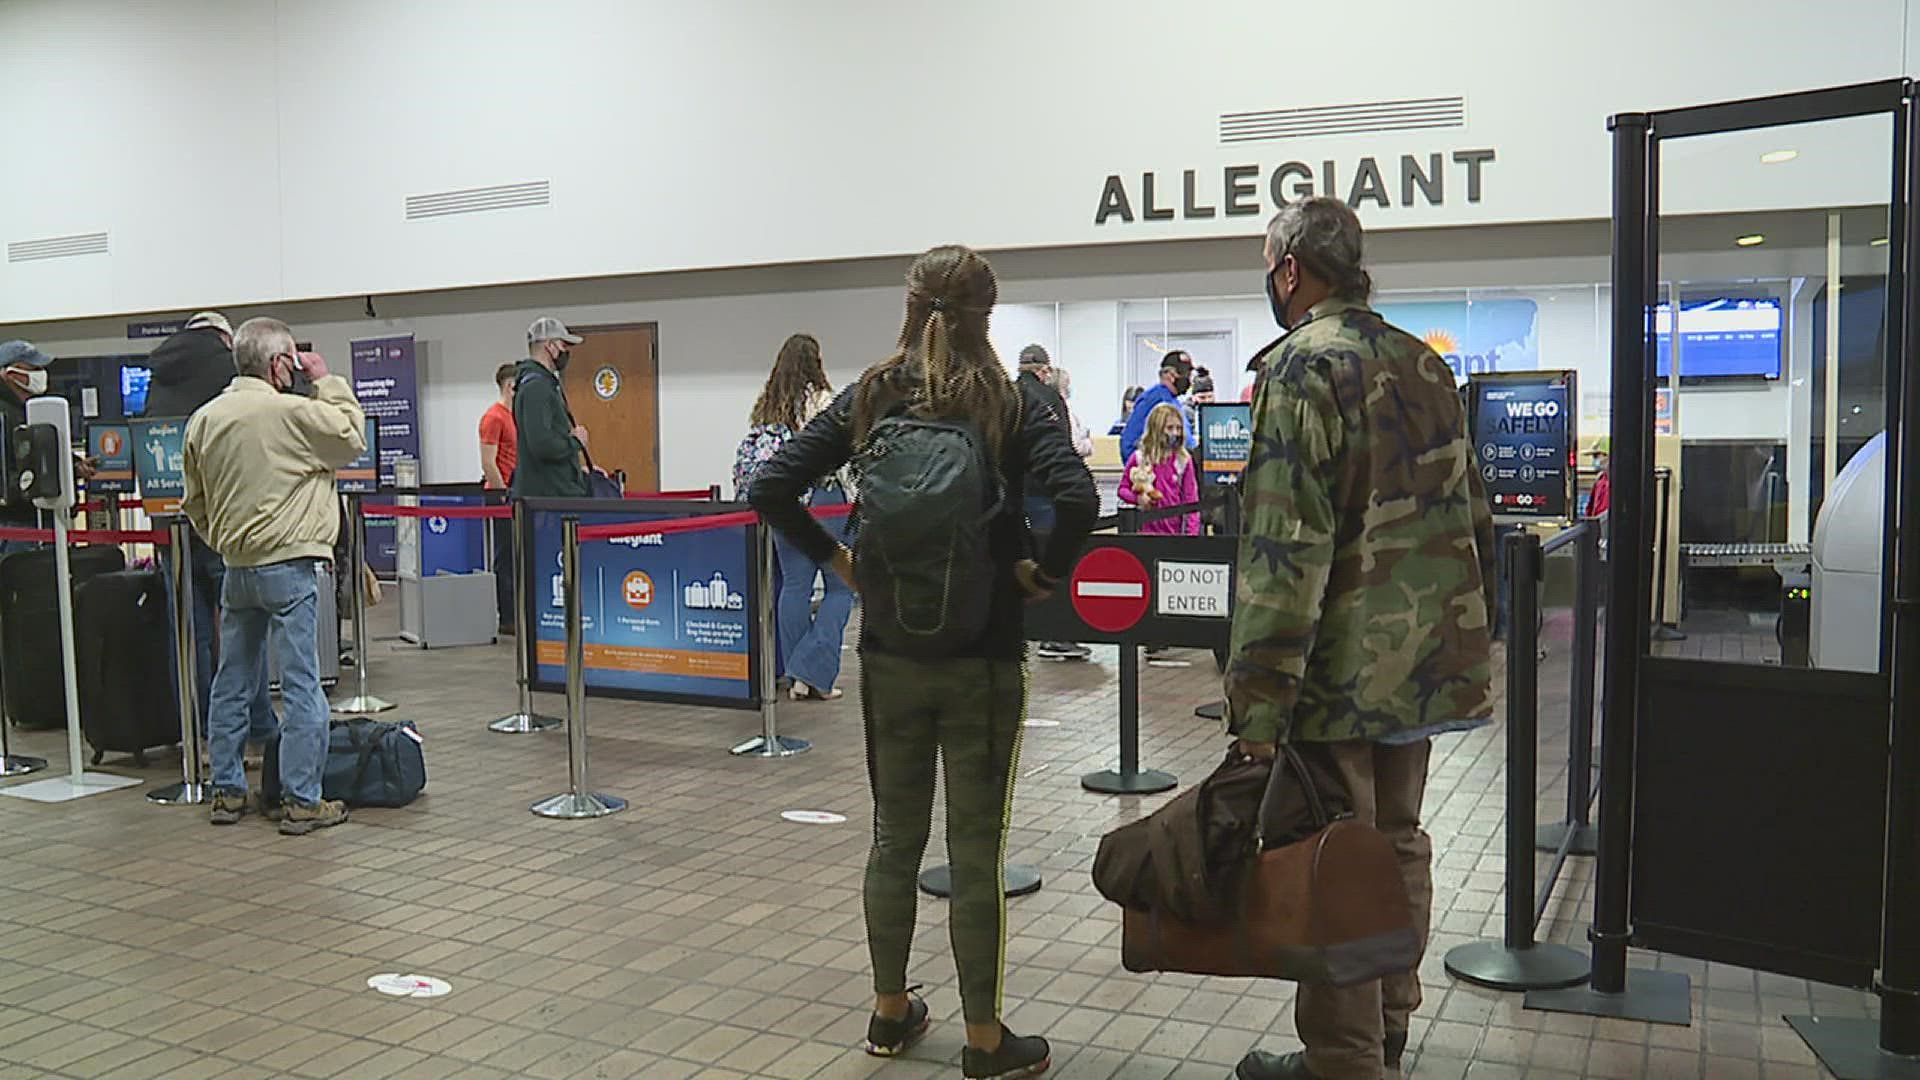 Four thousand people are expected to travel by air through MLI airport during Thanksgiving week in 2021.